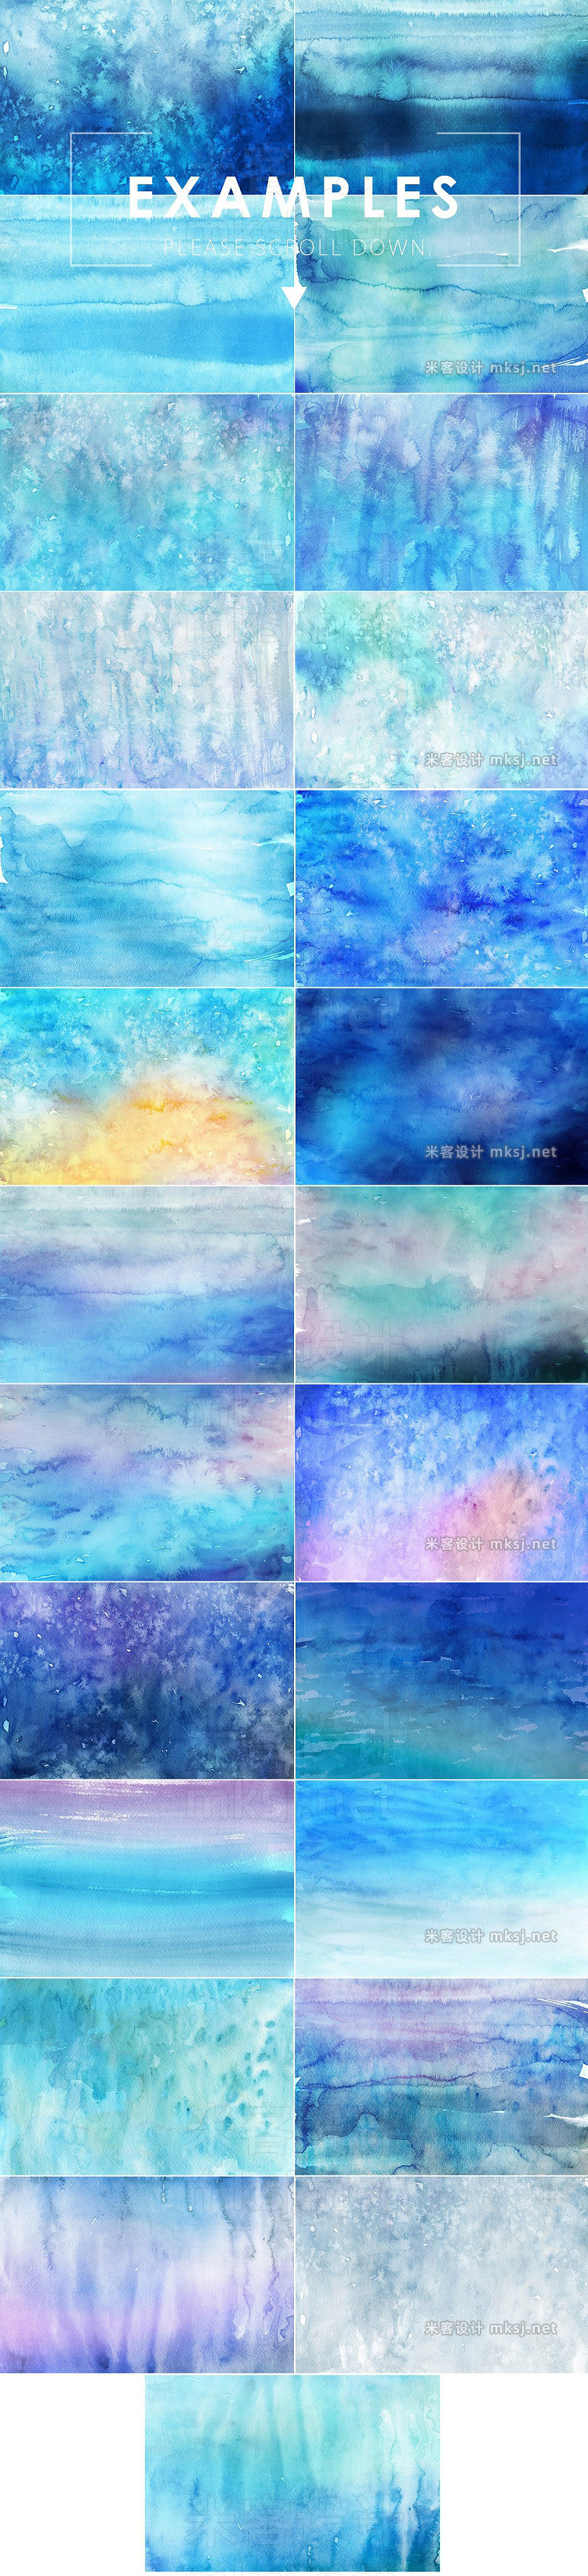 png素材 Winter Watercolor Backgrounds